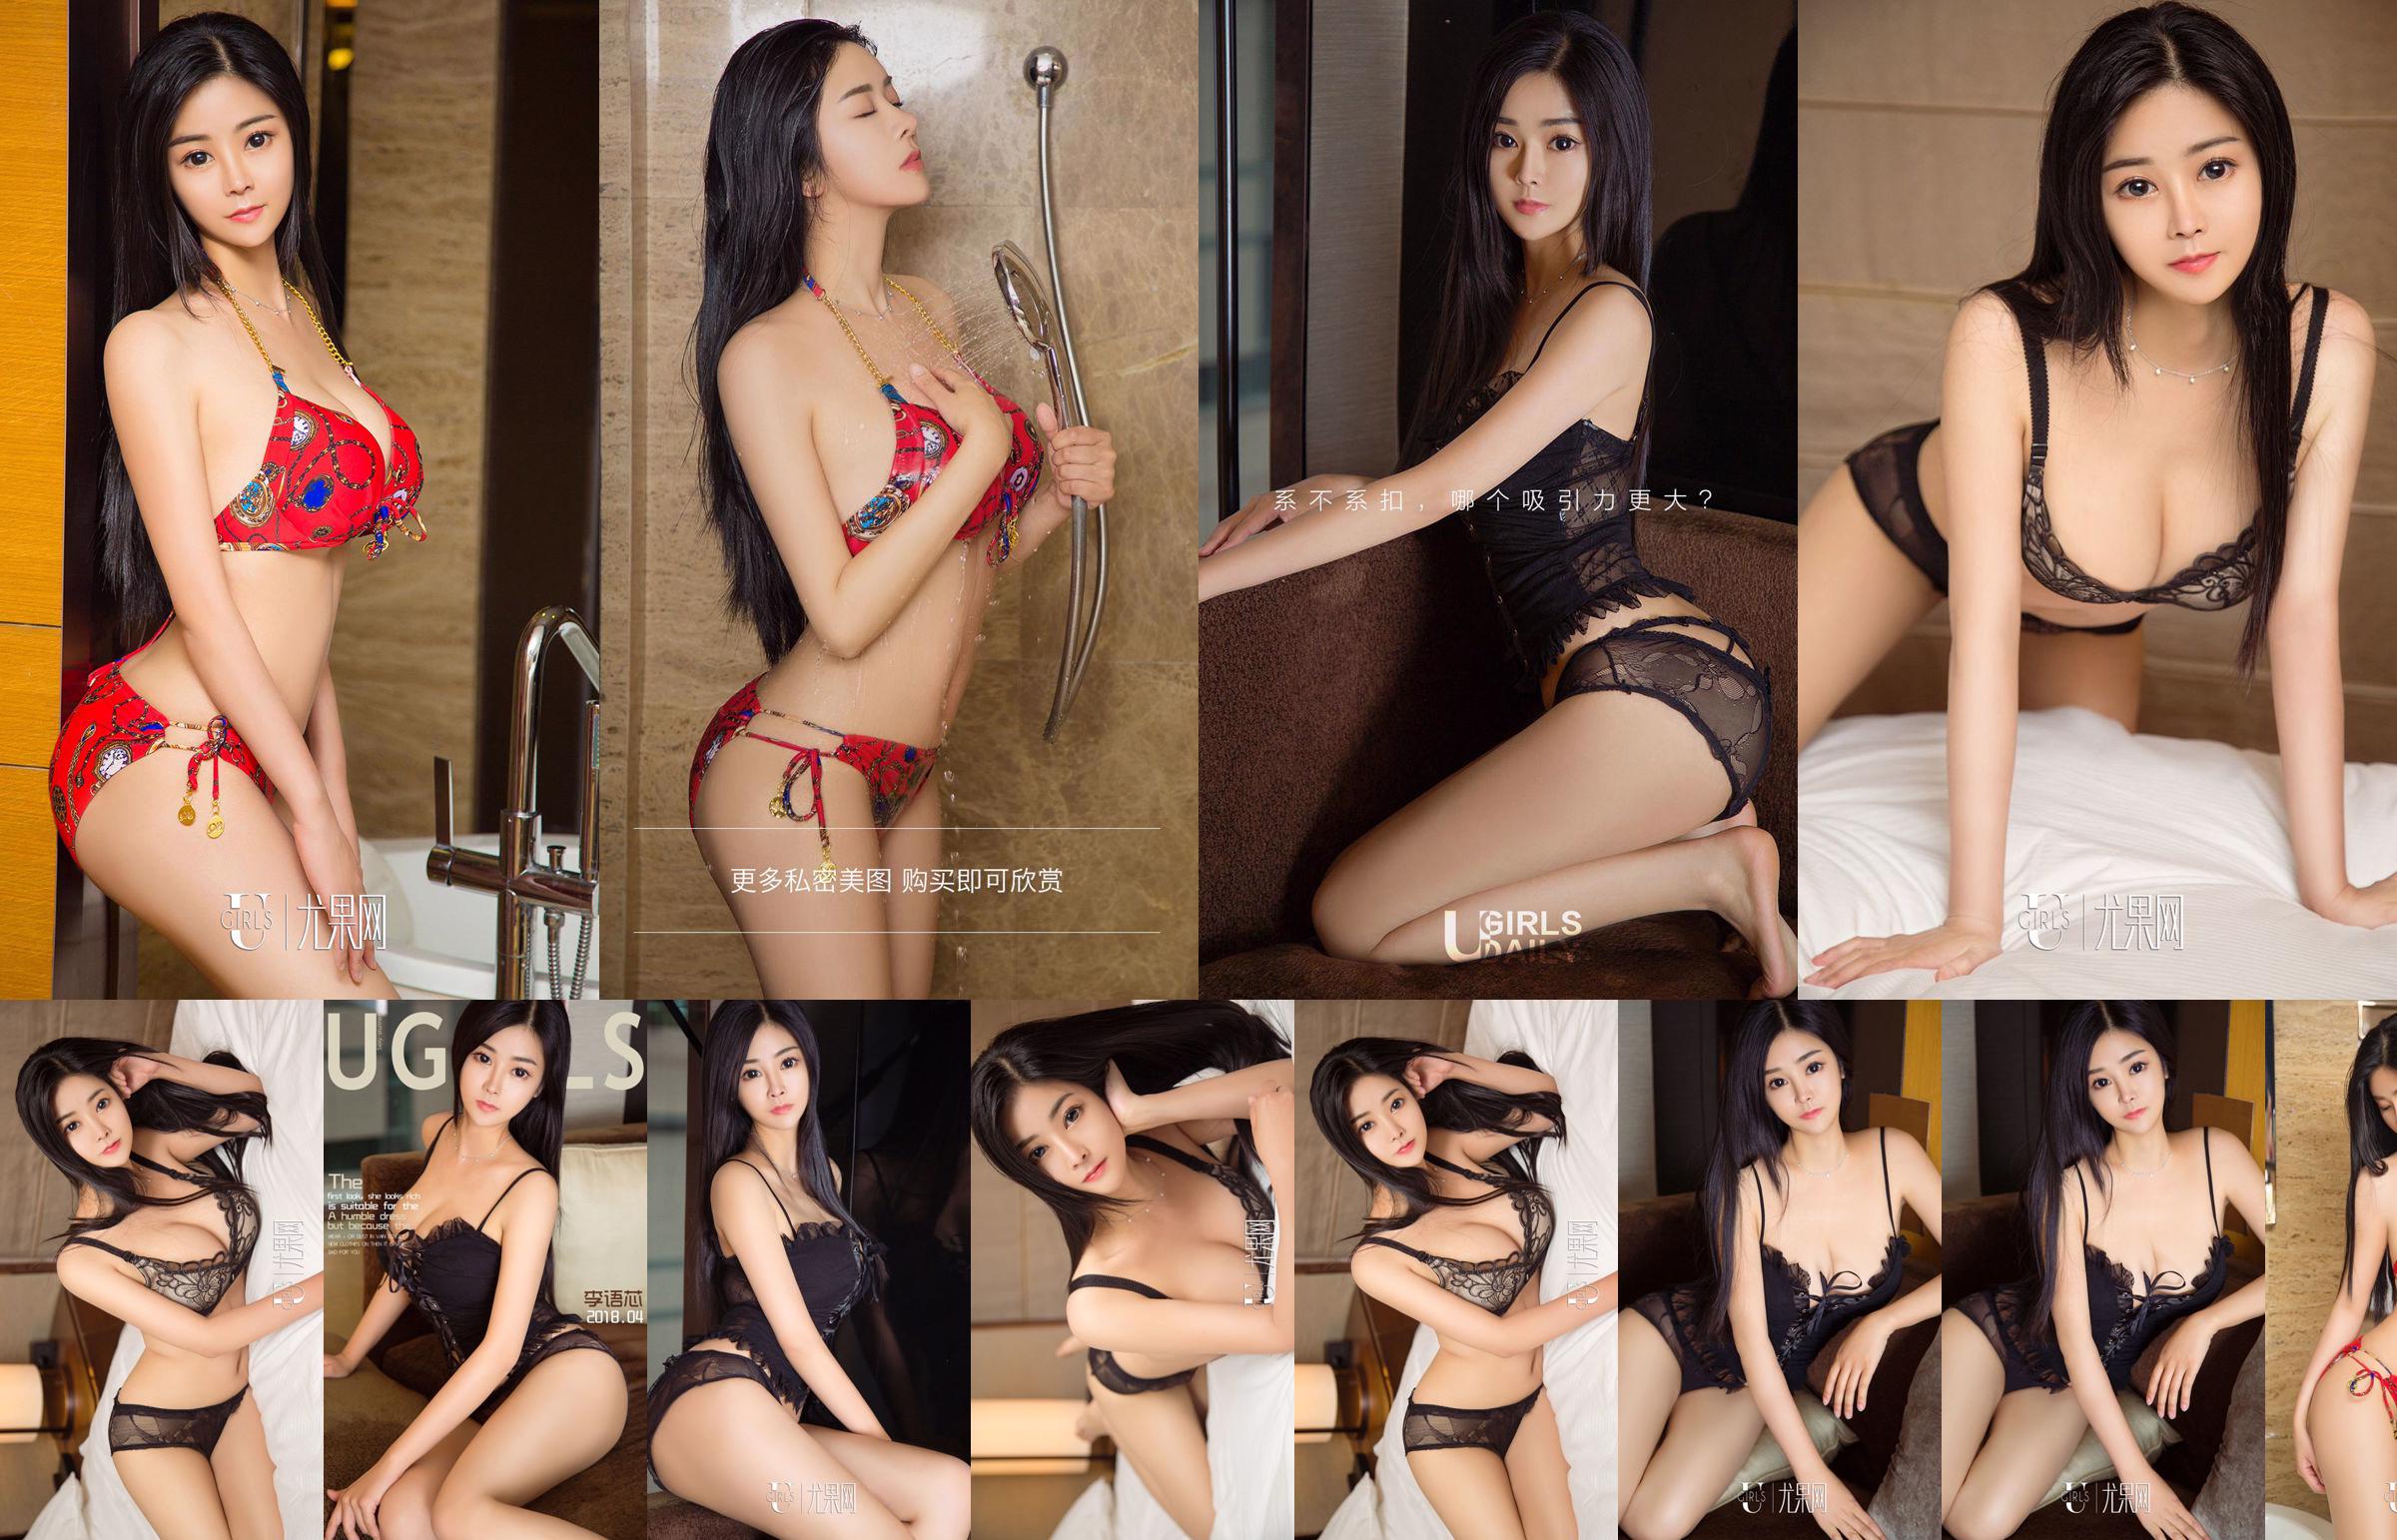 Li Yuxin "The Alluring Little Suit" [Youguoquan Ai Youwu] No.1061 No.aff1ae Page 1